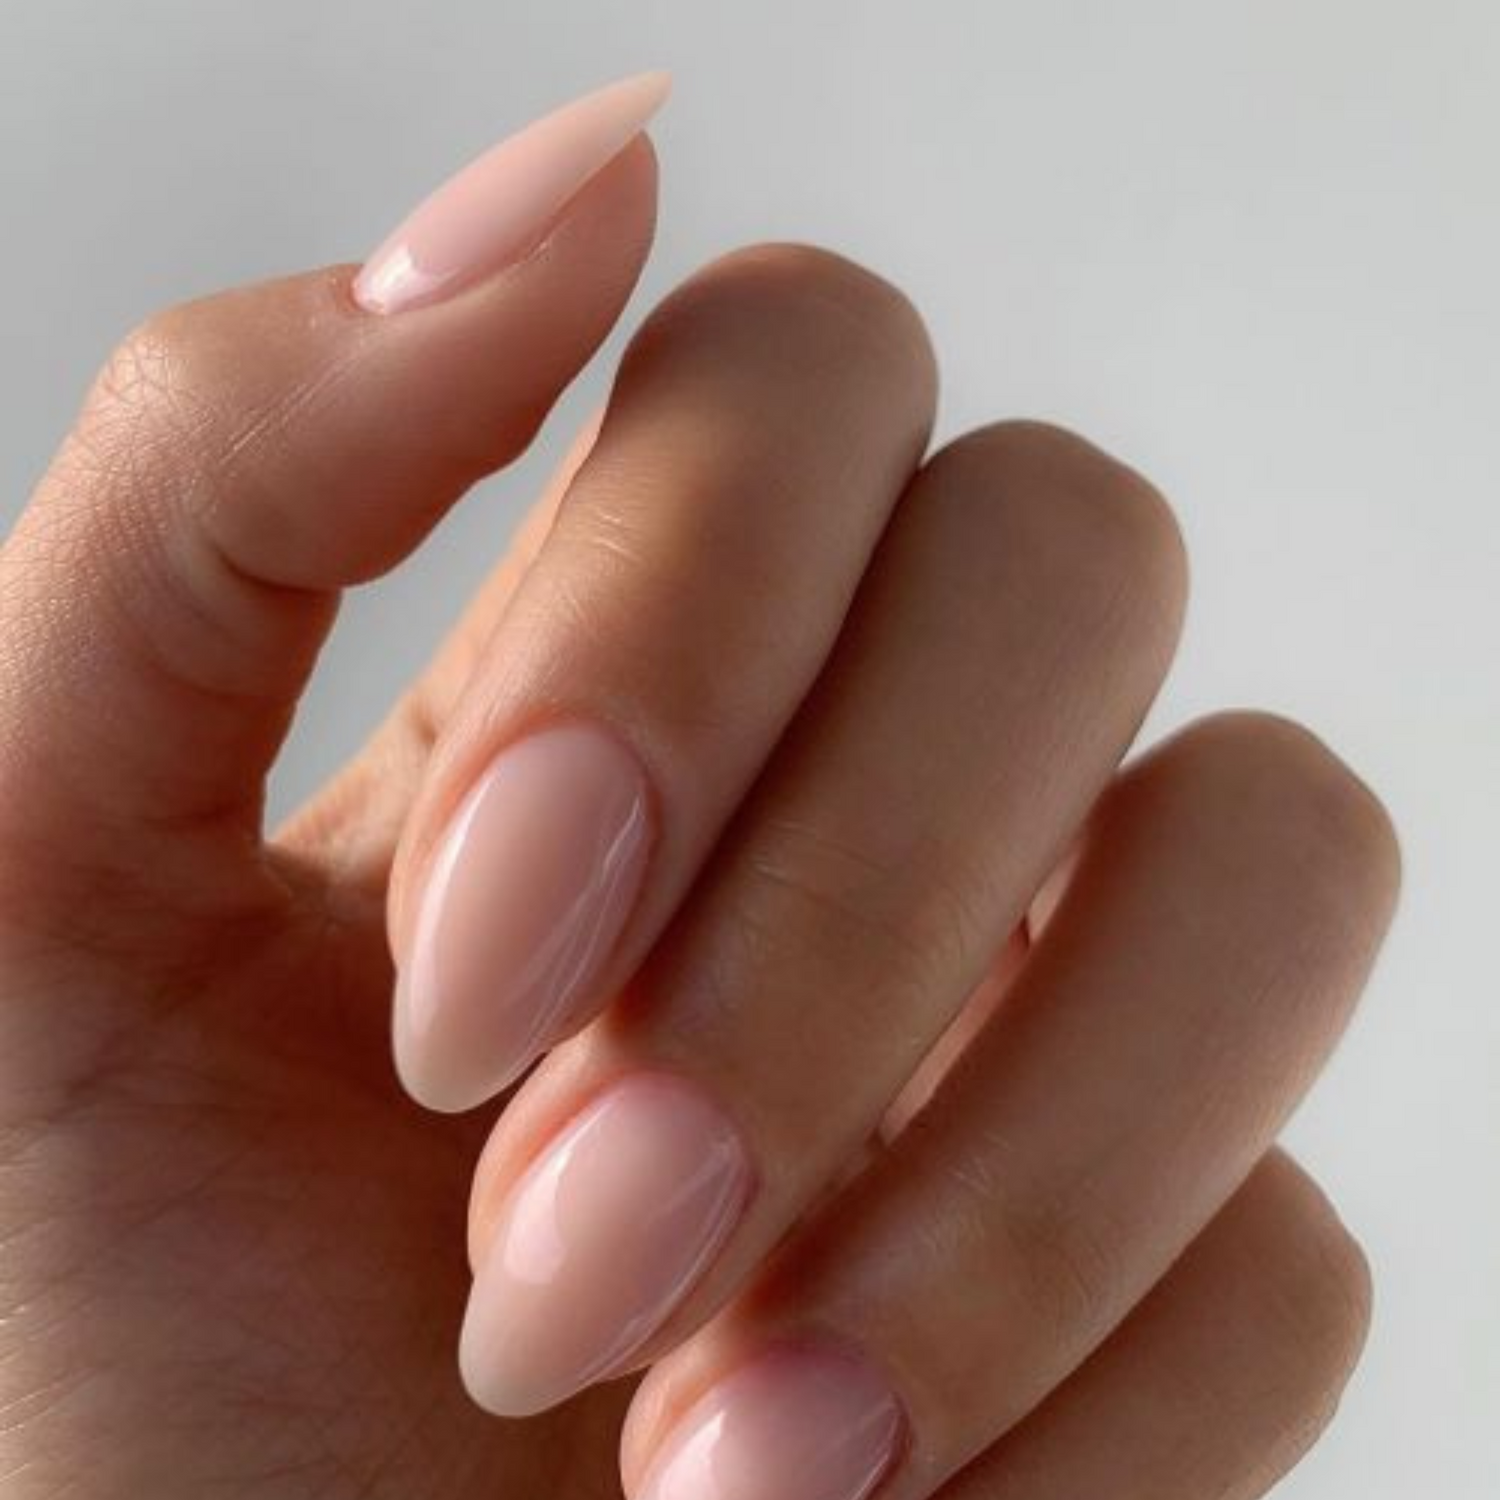 The Best Nail Shape to Compliment Your Hands